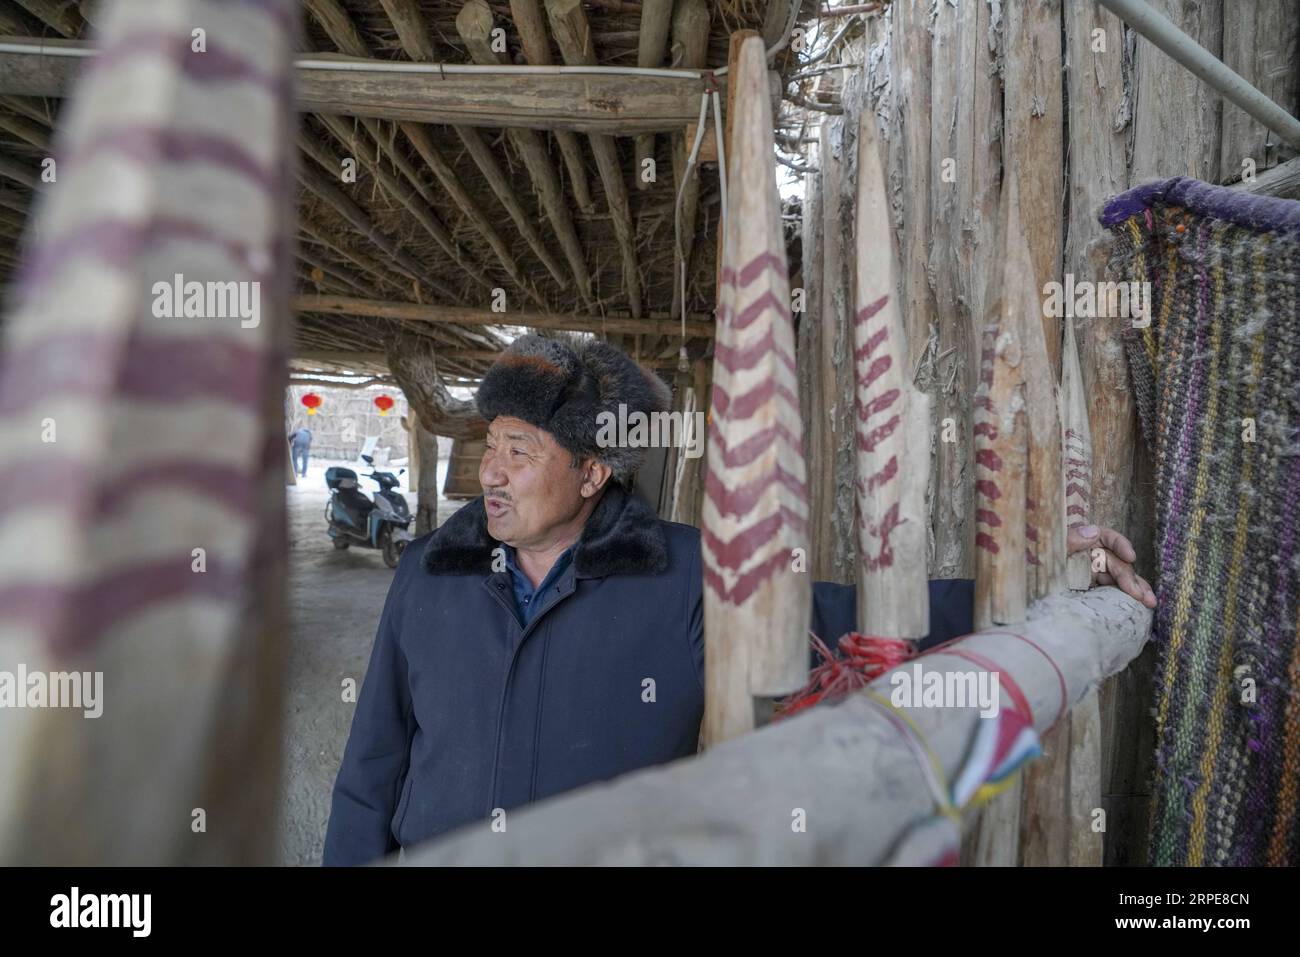 (190821) -- YULI, Aug. 21, 2019 -- Amudun Abudu is seen at home in Lop Nur People Village in Yuli County, northwest China s Xinjiang Uygur Autonomous Region, Jan. 29, 2019. Lop Nur People Village is located in Yuli County, where Tarim River flows through the deserts with populus euphratica forests reflection on the shimmering waves. Amudun Abudu, a 61-year old typical Lop Nur villager, works in local tourism industry. With the changes of the times, many Lop Nur people have various options for a living, yet he insists on the tradition of fishing in rivers and lakes. Not only does he make delici Stock Photo